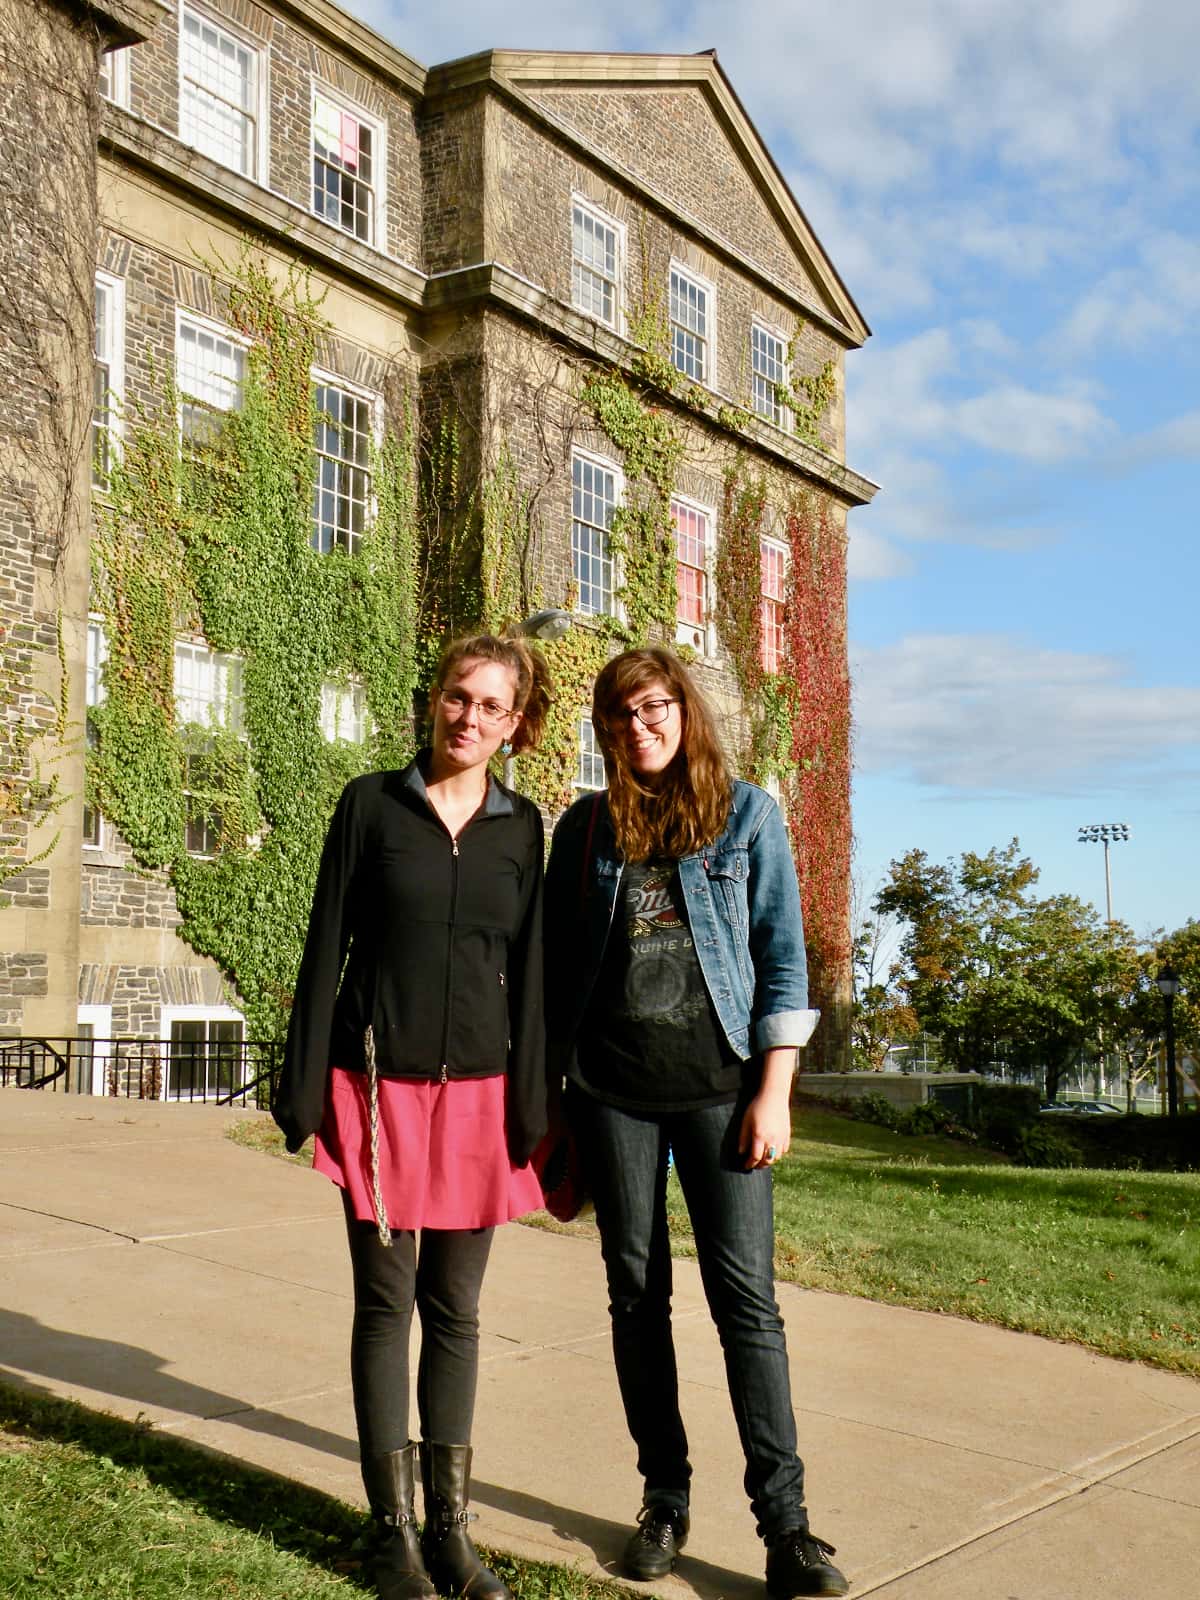 Two women standing in front of old stone building